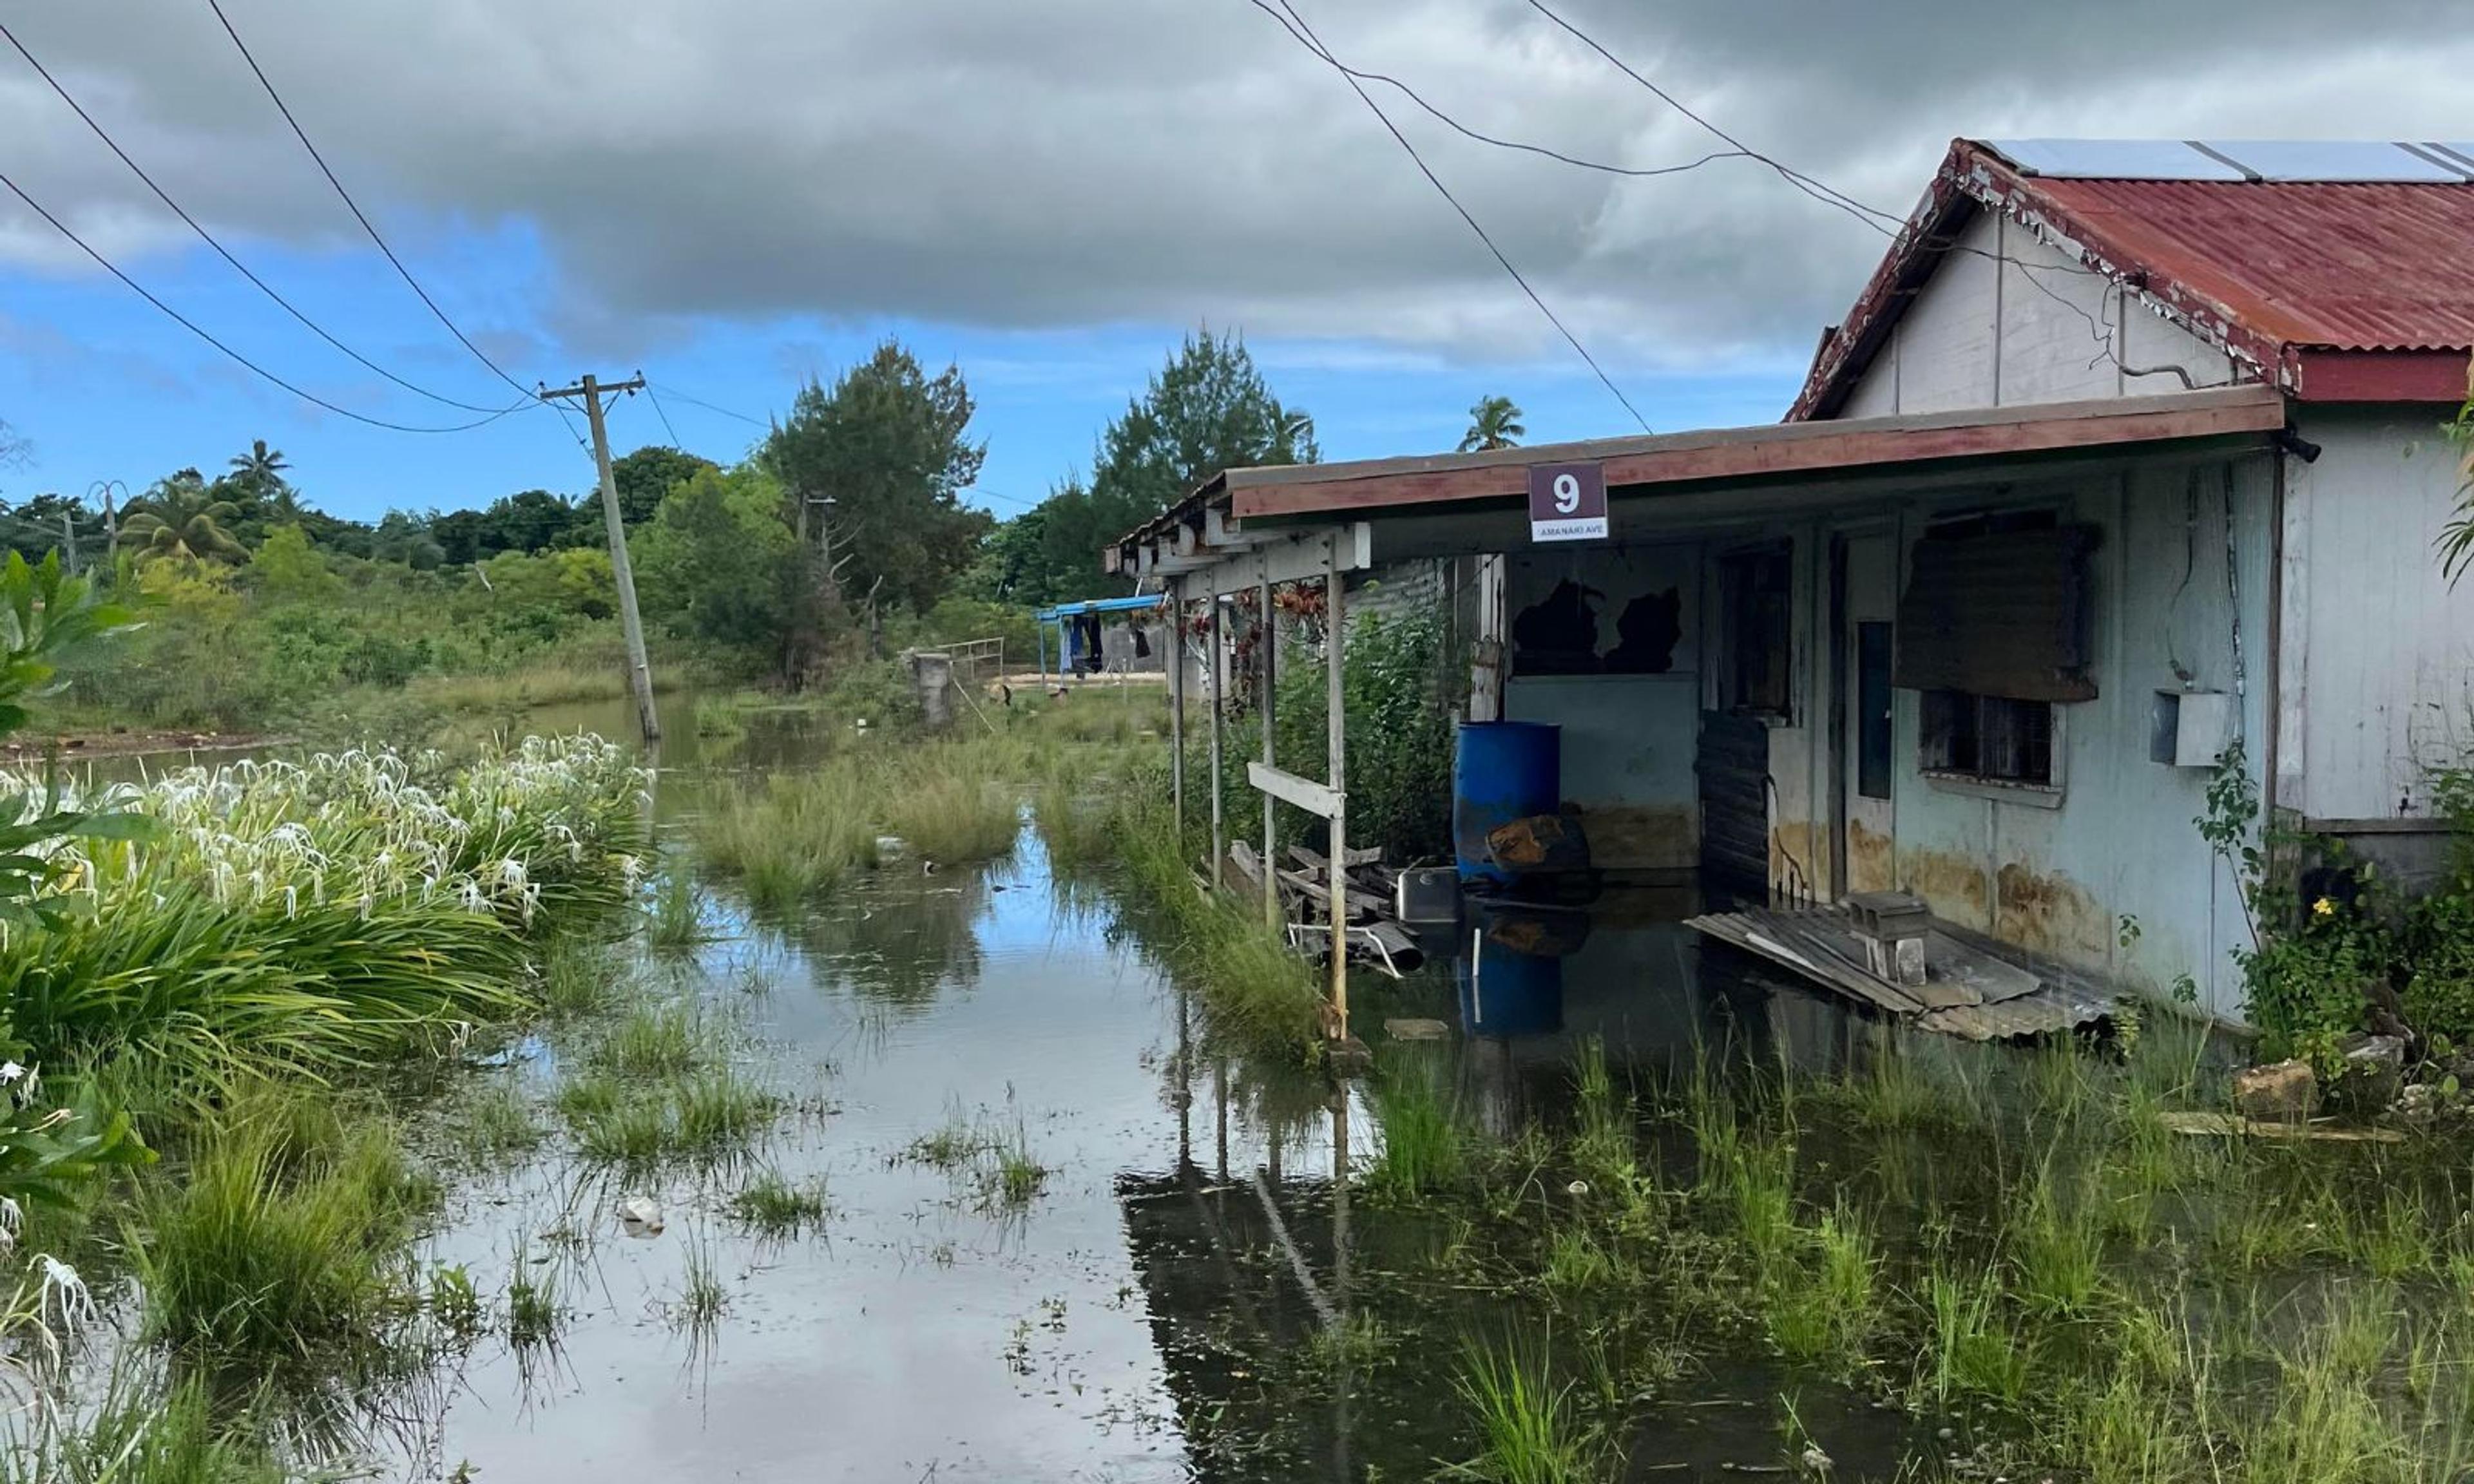 A home in Kolomotu’a, Tonga, a low-lying village with persistent flooding issues following heavy rain.